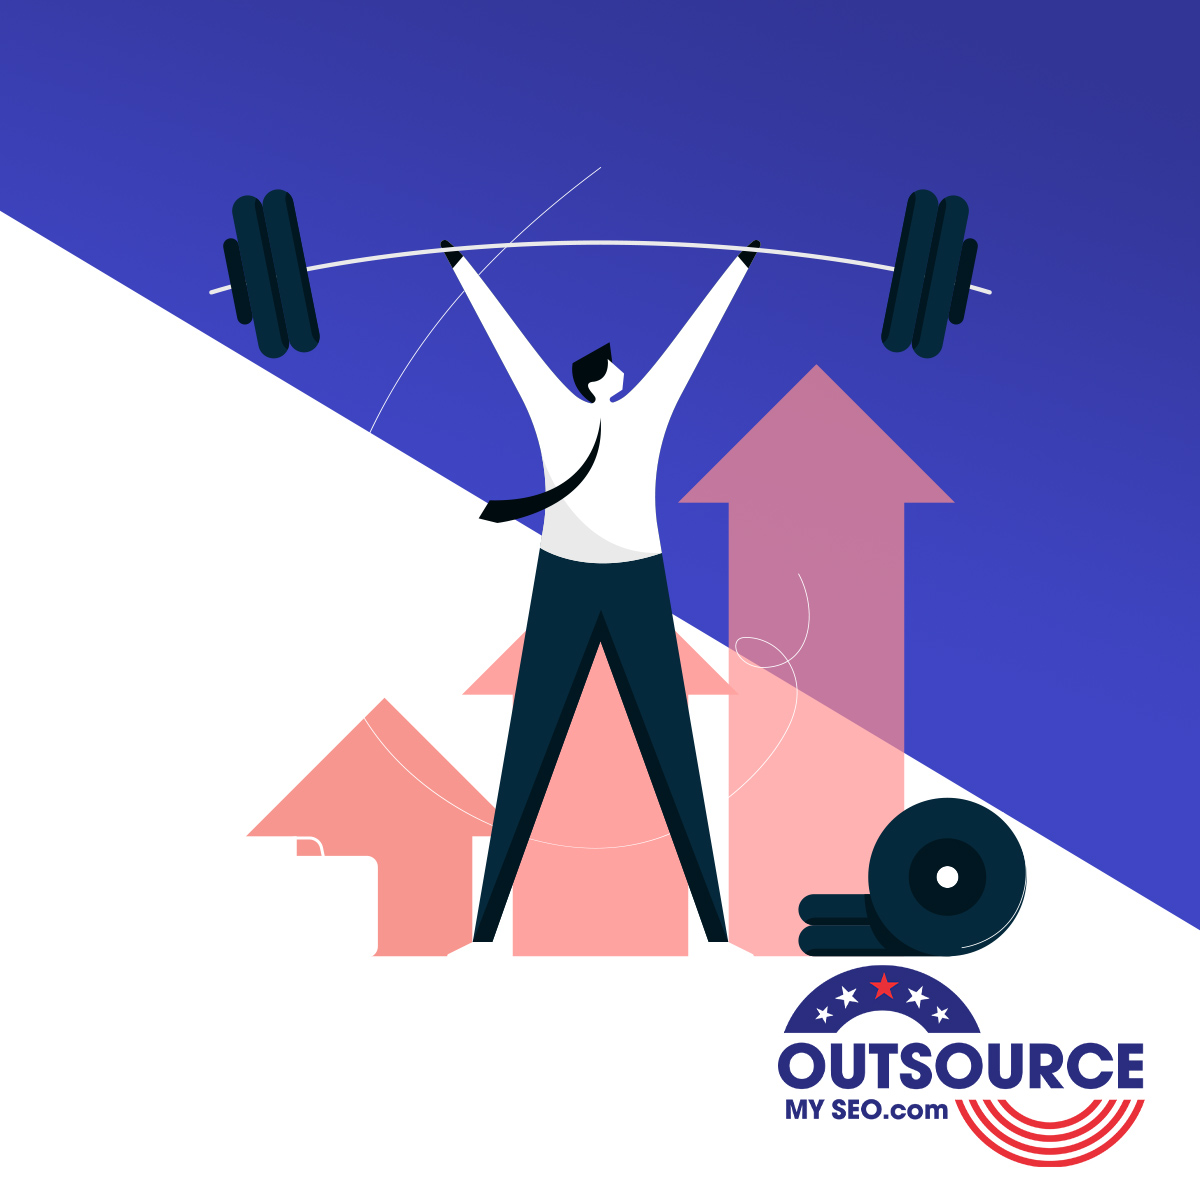 Elevate your agency's game without the heavy lifting 🚀 With Outsource My SEO, tap into premium white label SEO services and watch your client satisfaction soar! #SEOOutsourcing #WhiteLabelExcellence #whitelabelseo #whitelabel #outsourceseo #seotips #seo bit.ly/40ViGUB